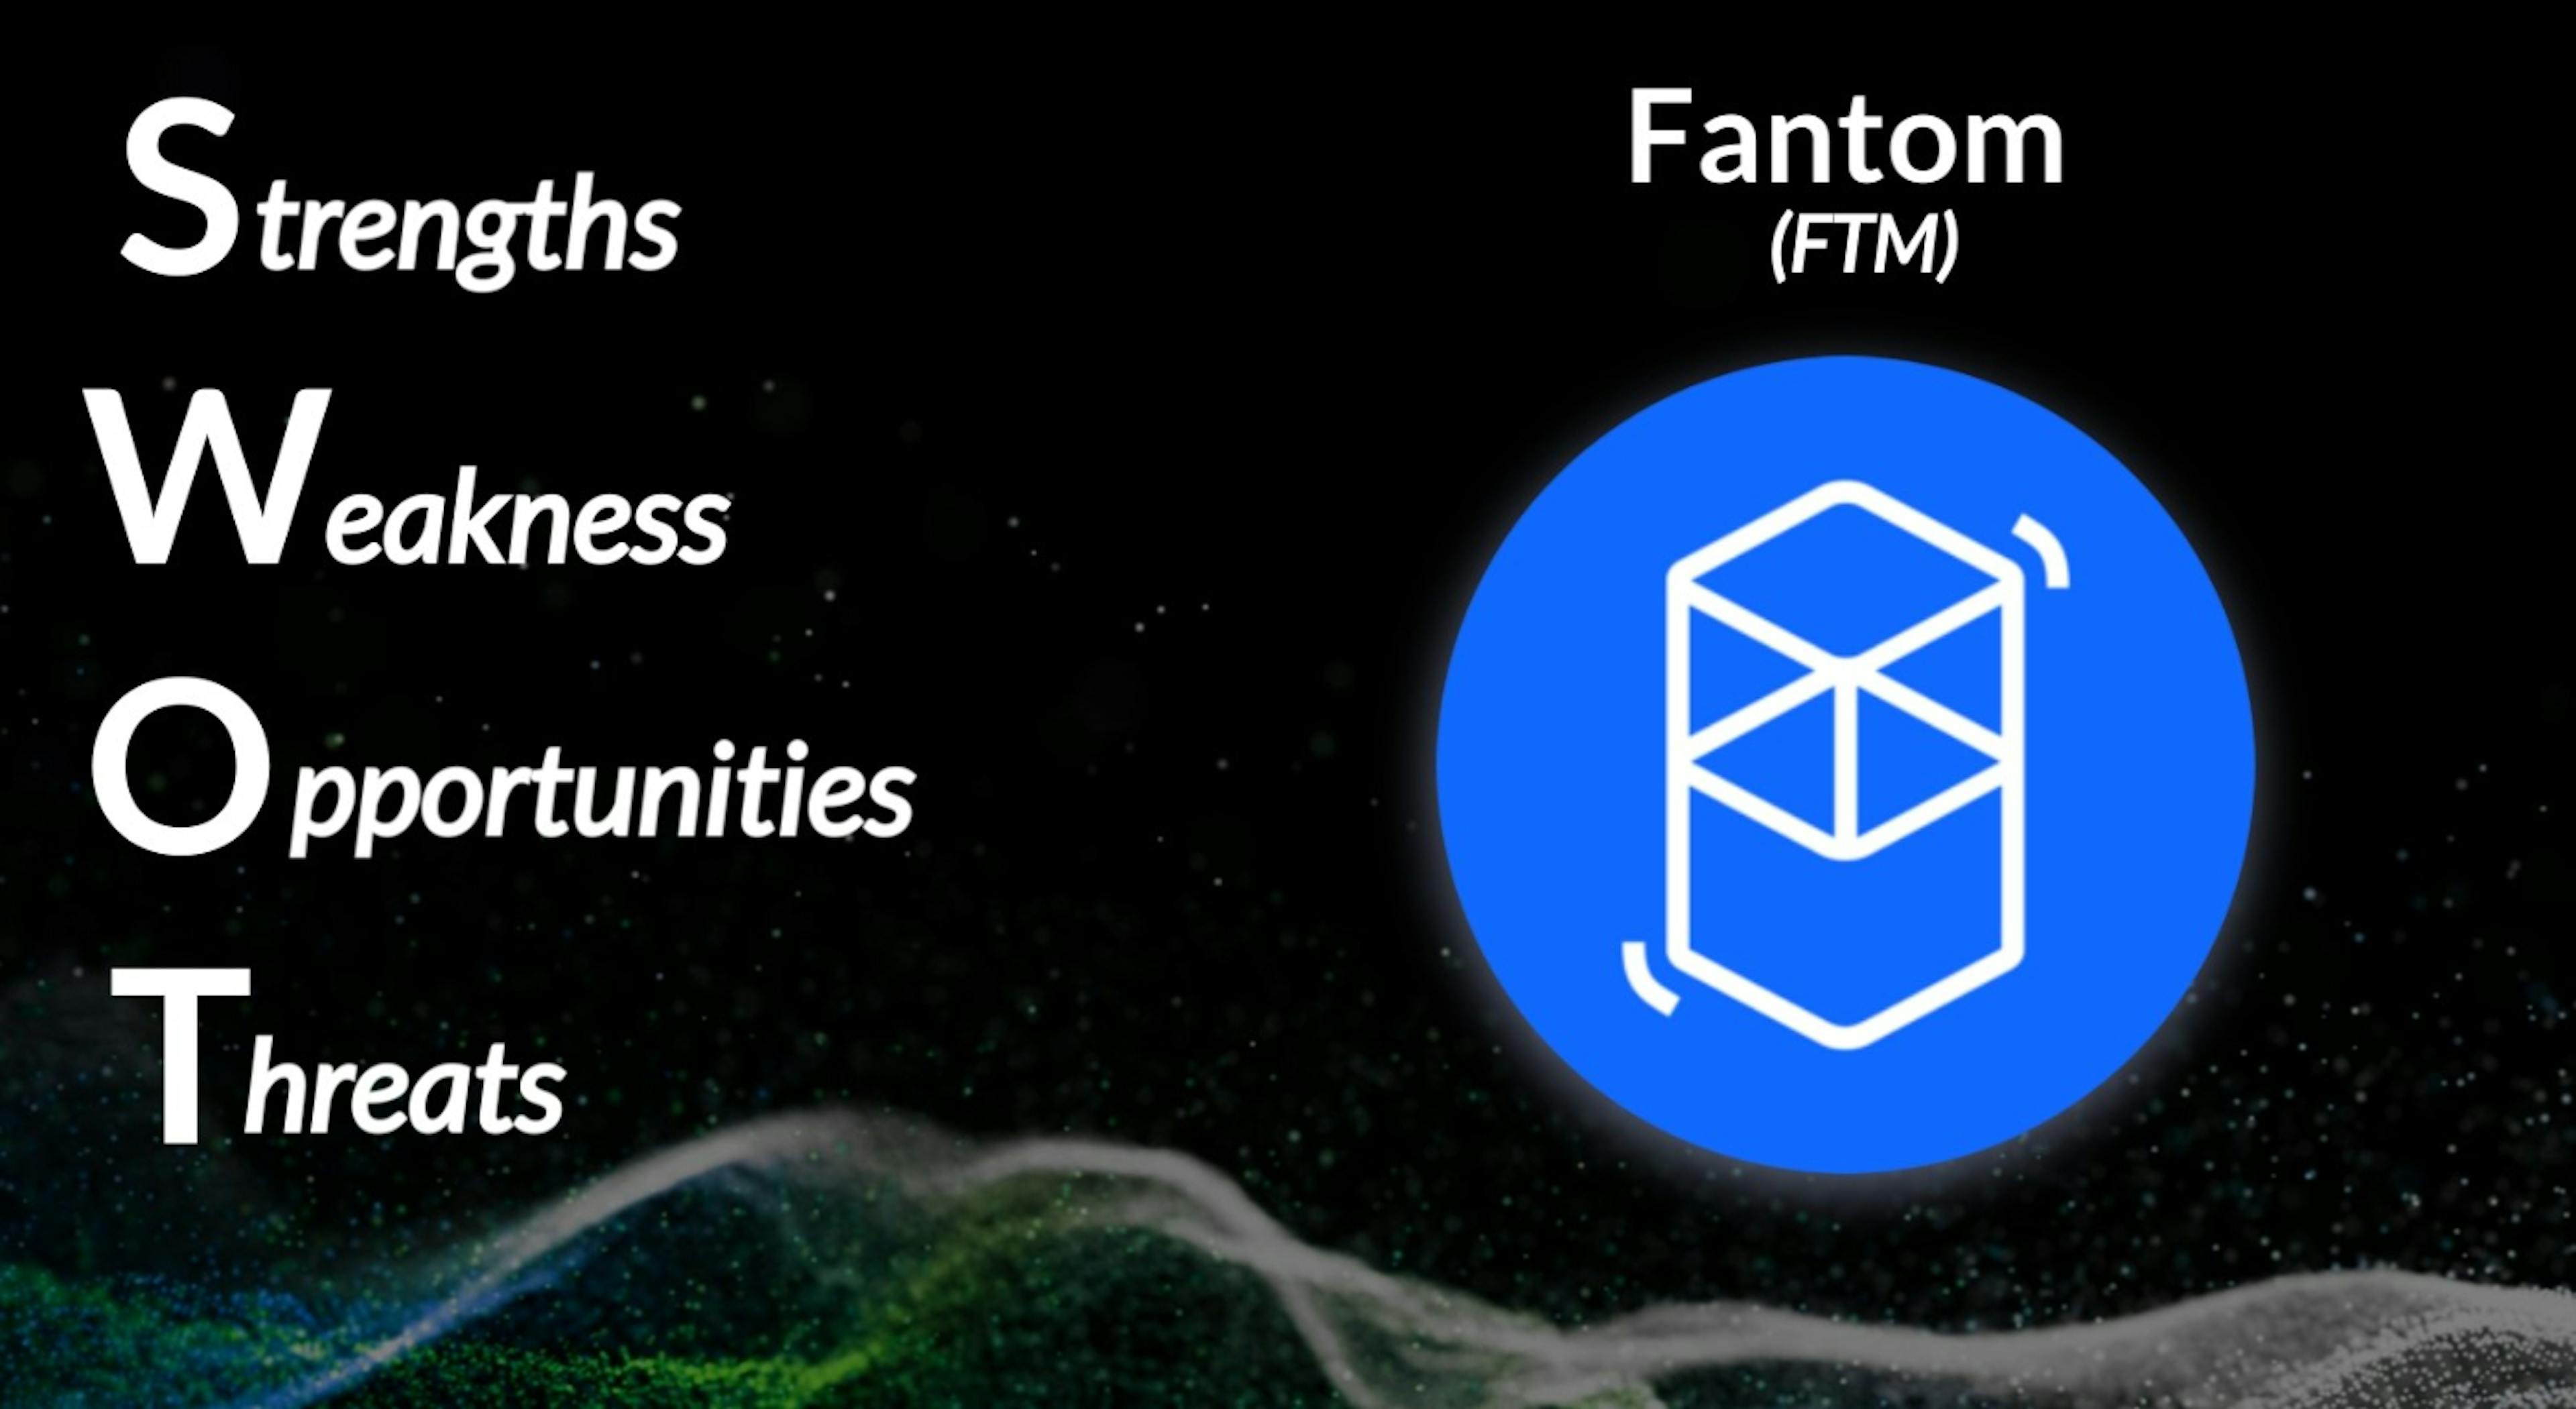 featured image - The Fantom (FTM) SWOT Analysis